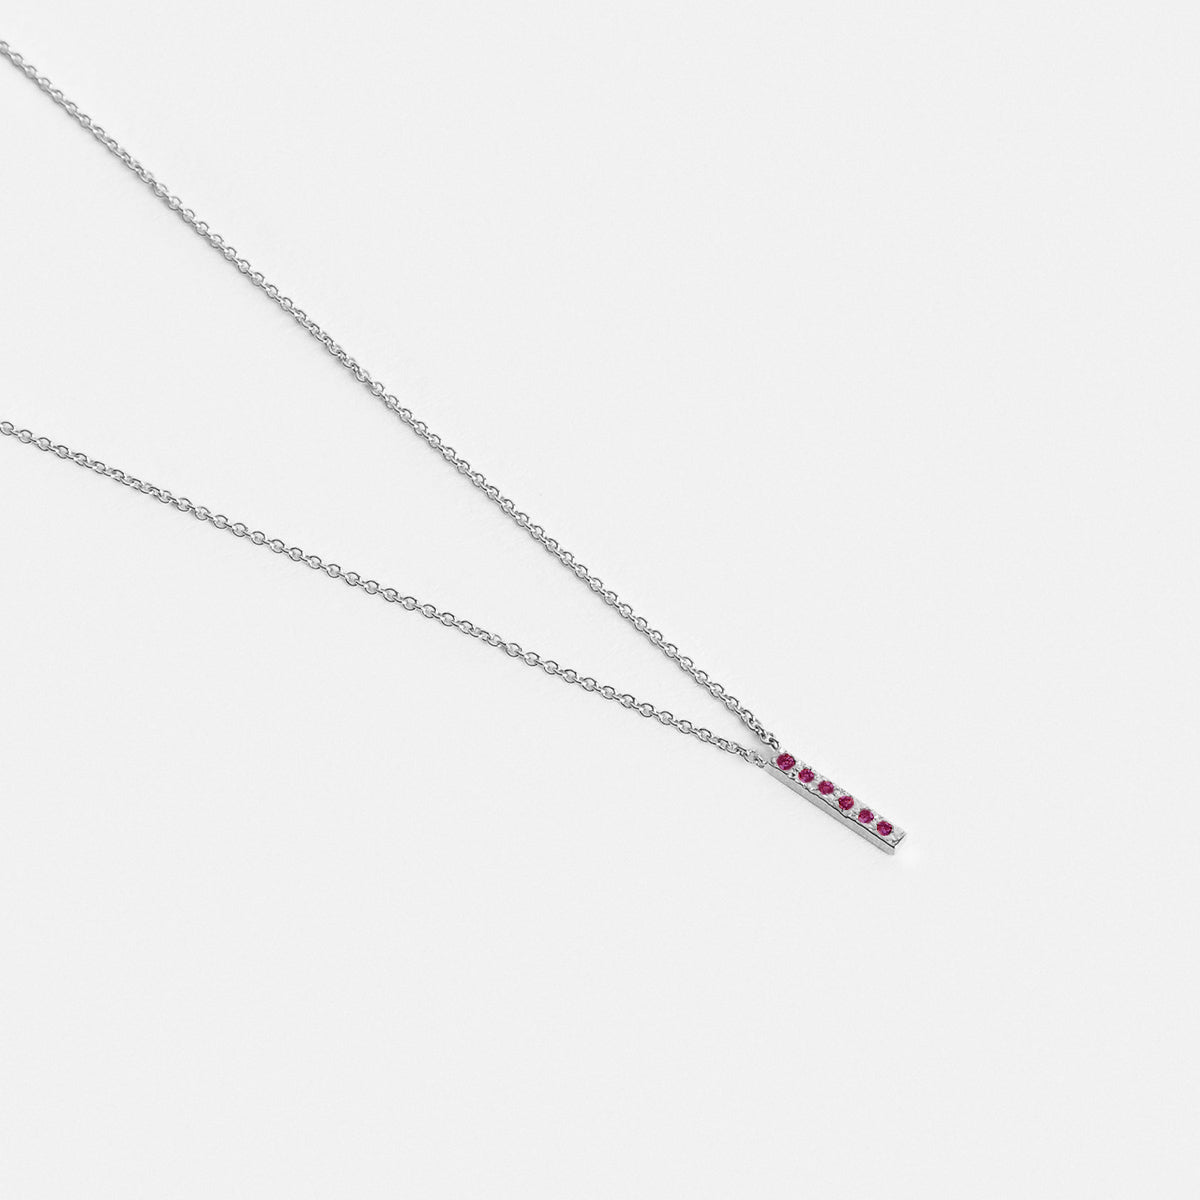 Mini Tiru Delicate Necklace in 14k White Gold set with Rubies By SHW Fine Jewelry NYC